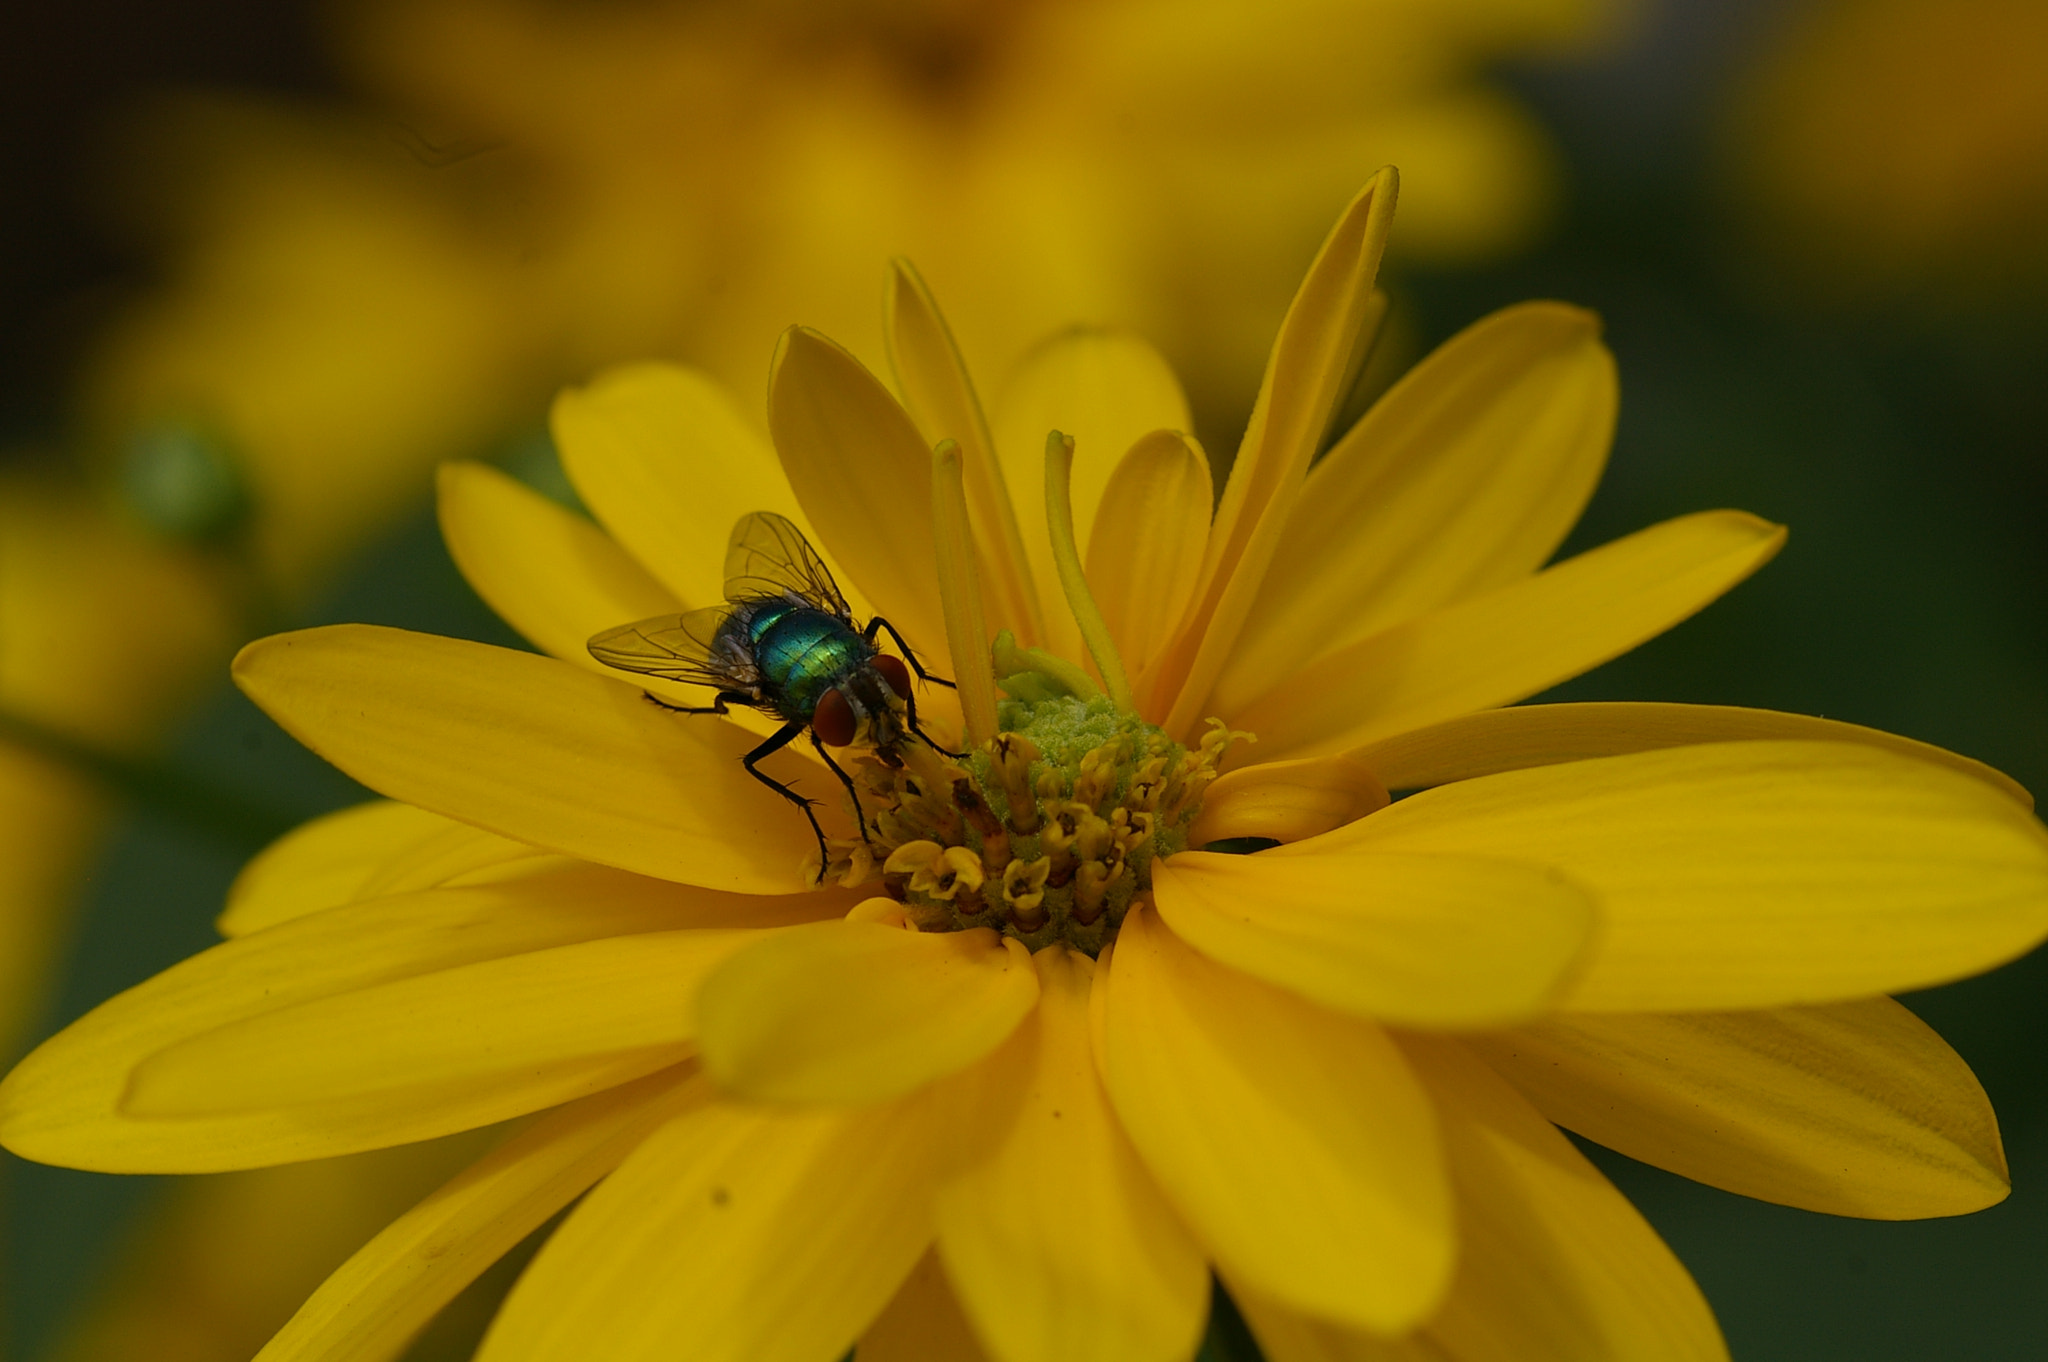 Pentax *ist DS sample photo. A fly on a flower photography